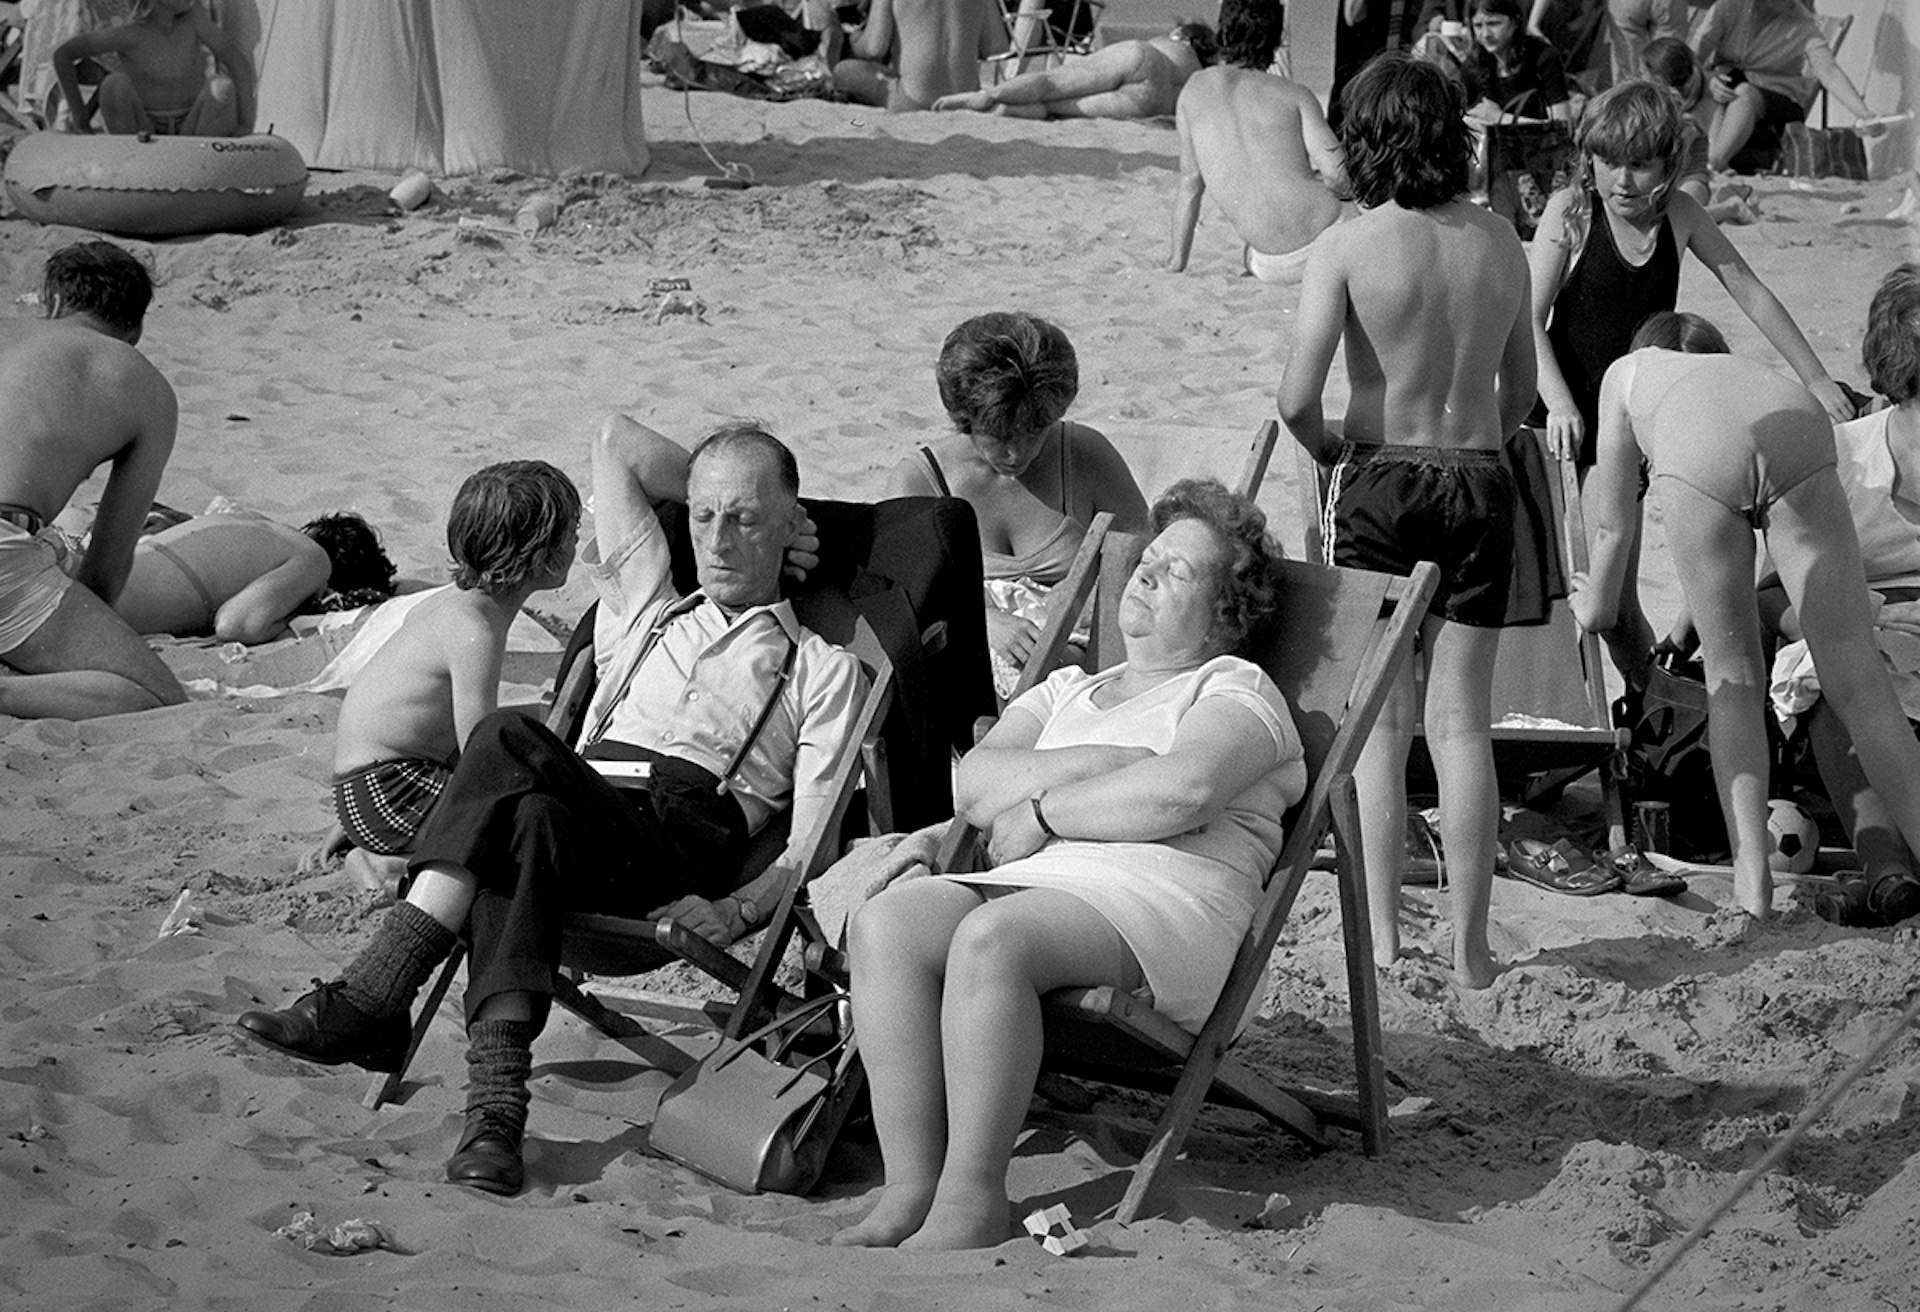 Evocative photos of a seaside holiday in 1960s Blackpool